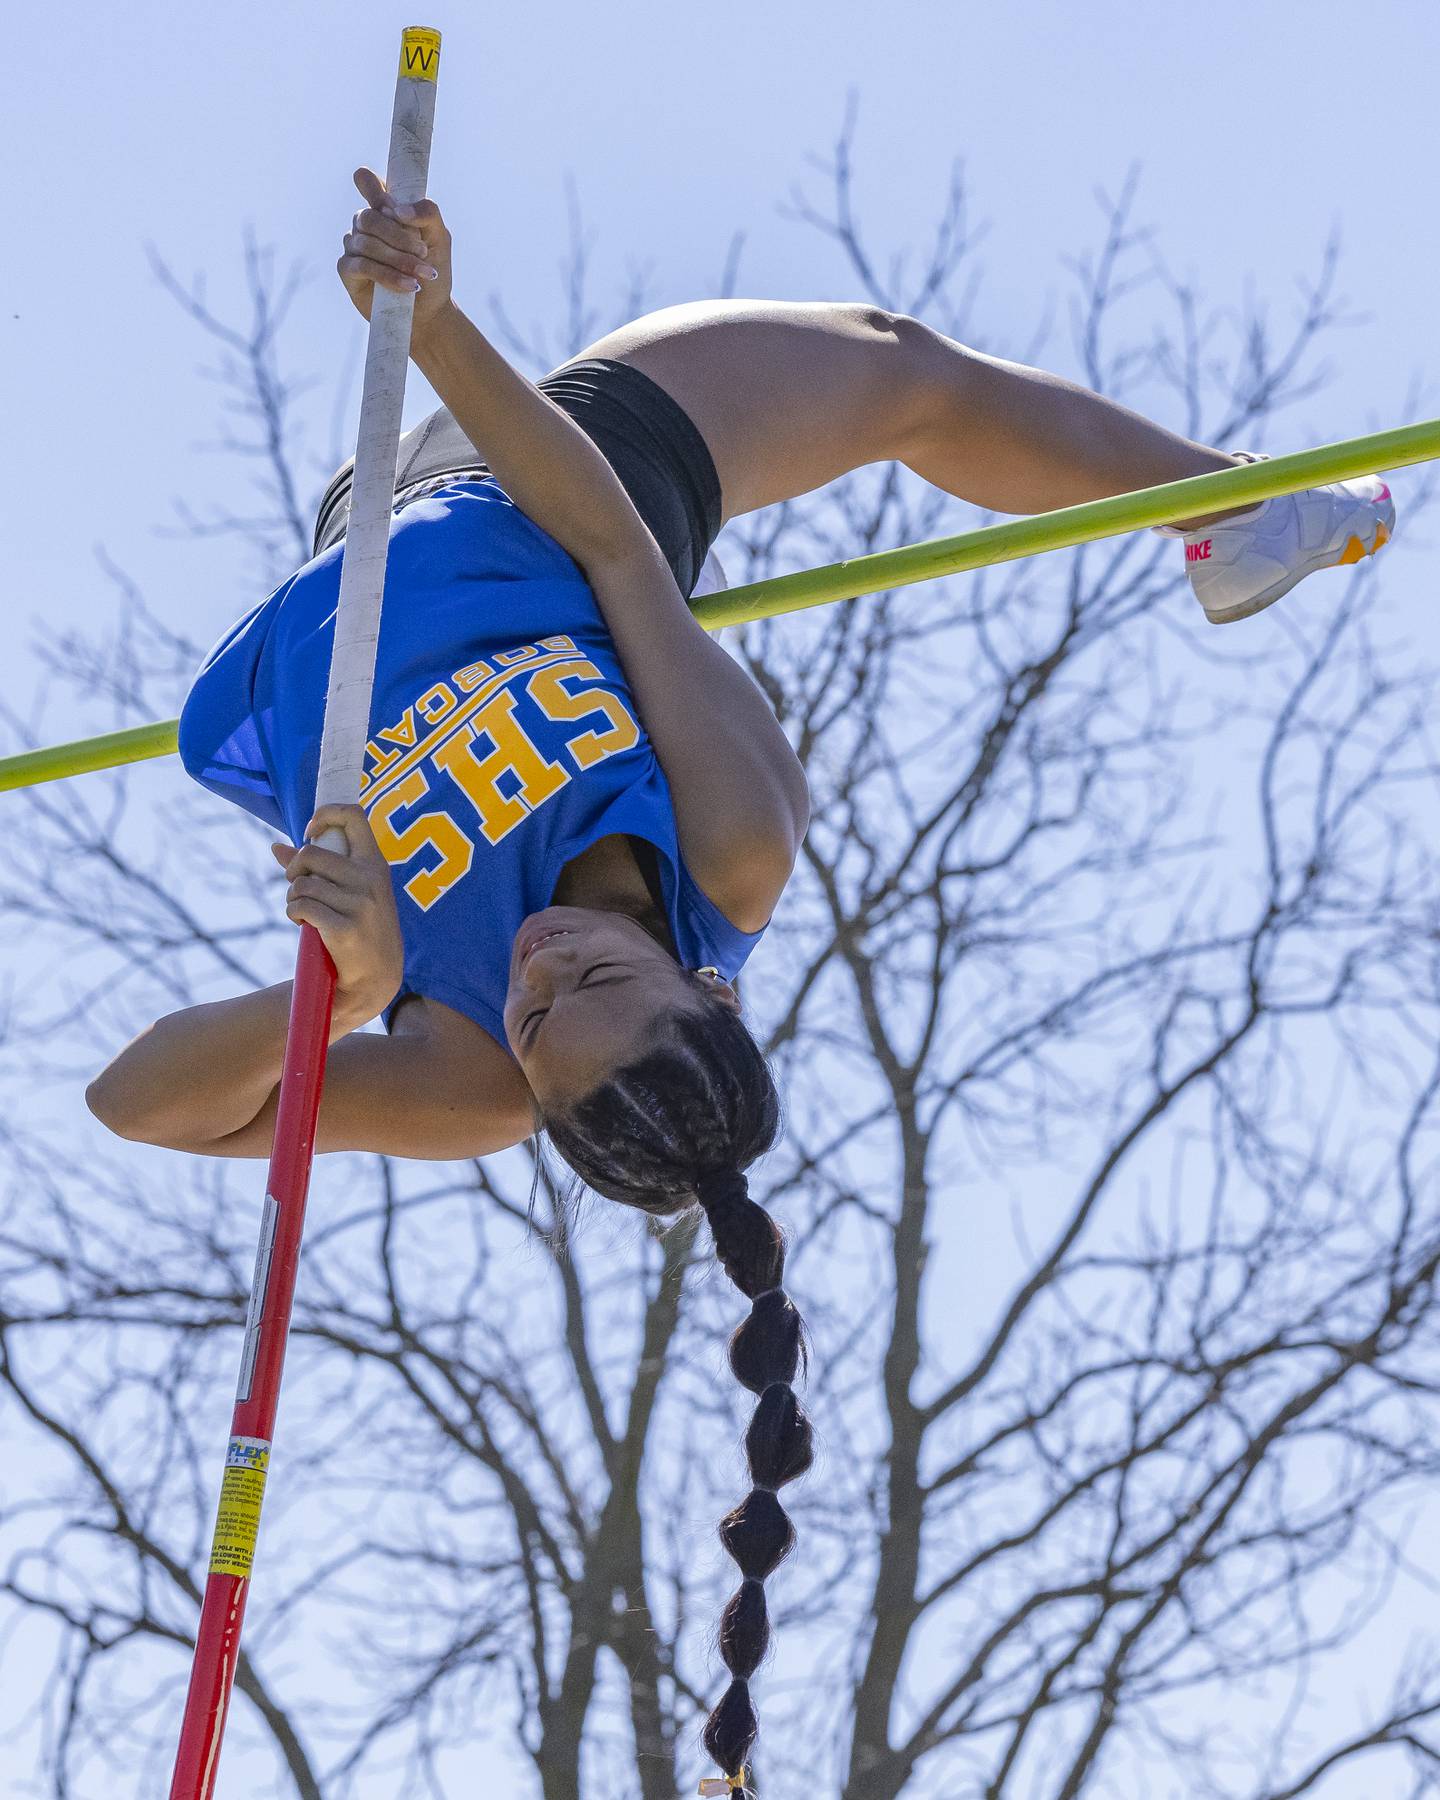 Alexis Punsalan of Somonauk High School wins the women's pole vault after a clearing the bar at 2.9 meters during the Rollie Morris Invite at Hall High School on April 13, 2024.